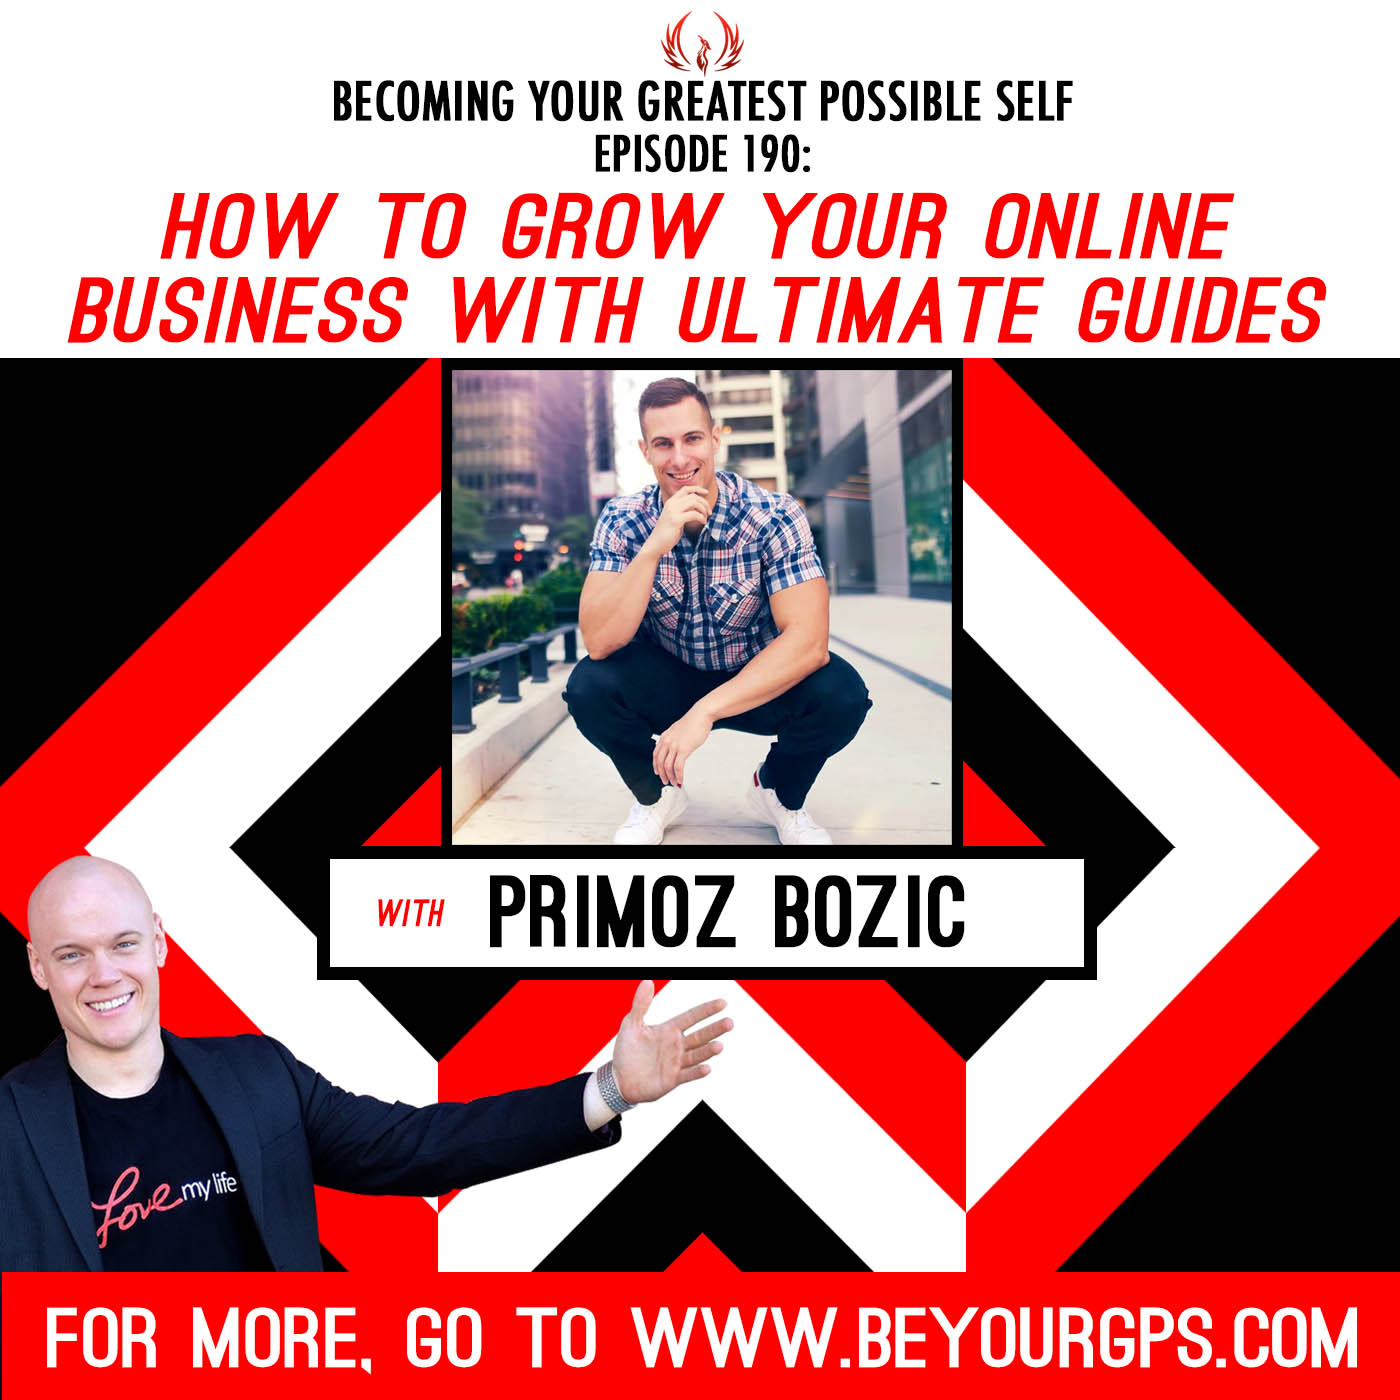 How to Grow Your Online Business with Ultimate Guides with Primoz Bozic